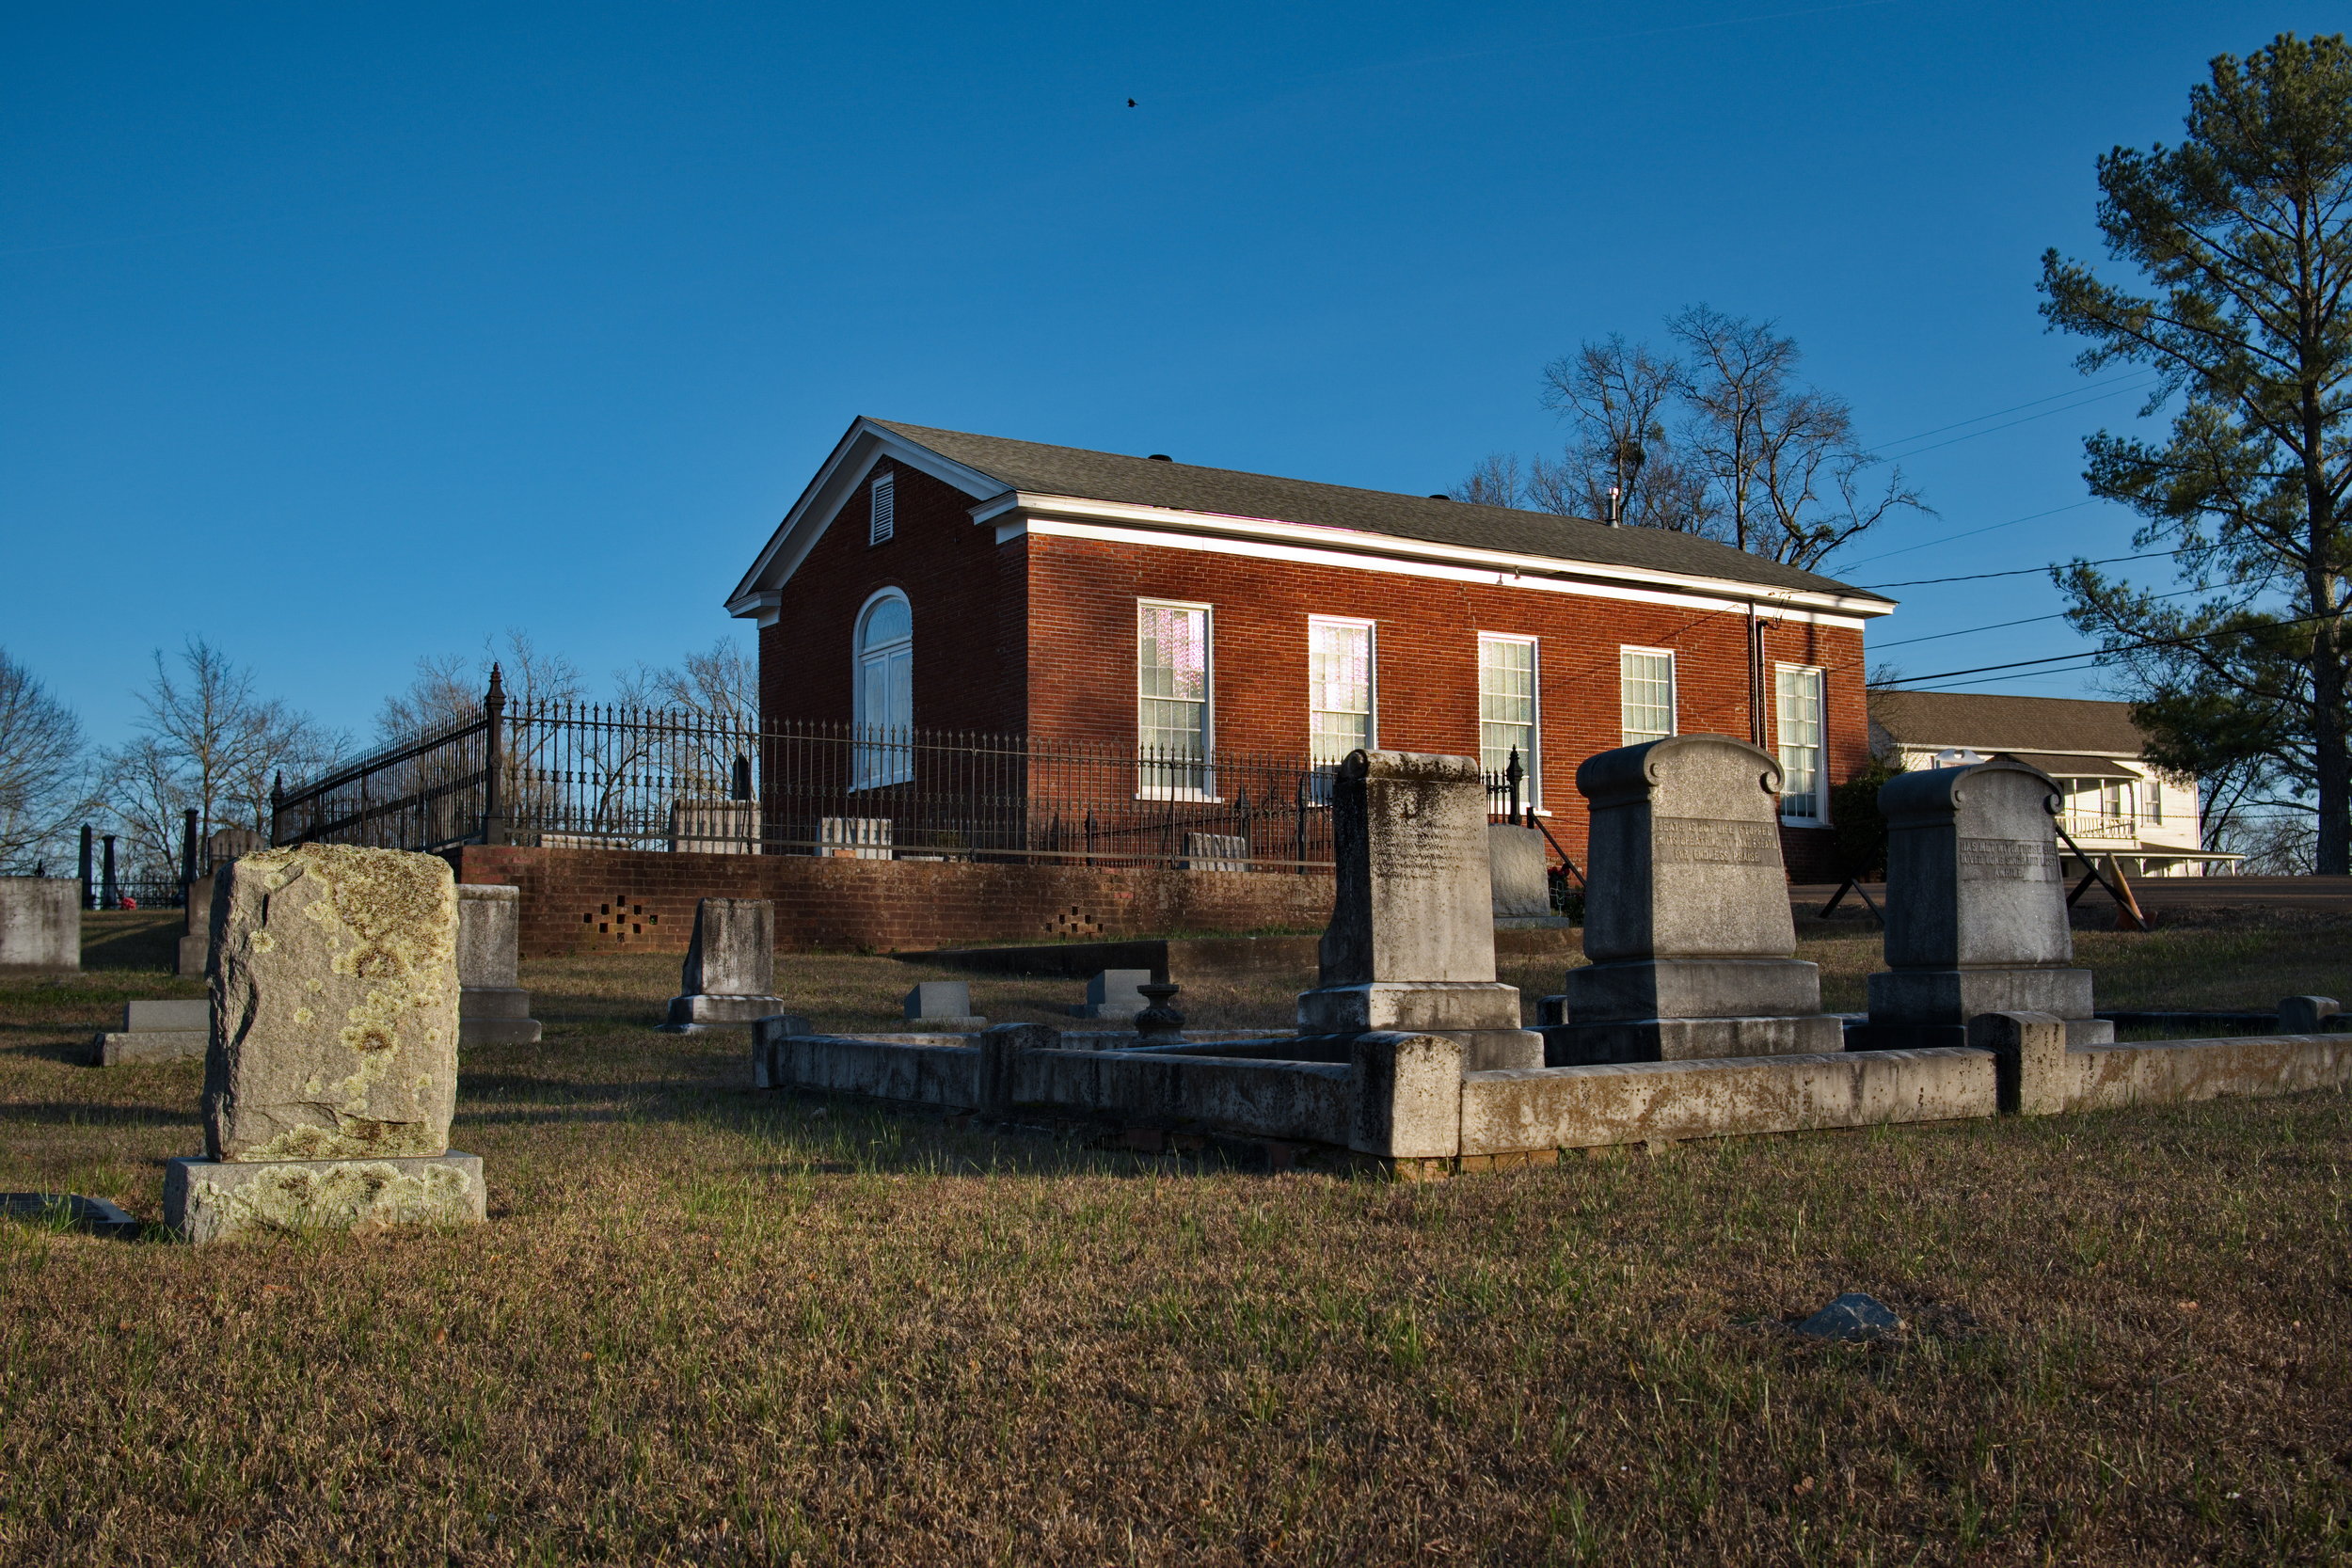  The protestant church and cemetery in West, Mississippi 